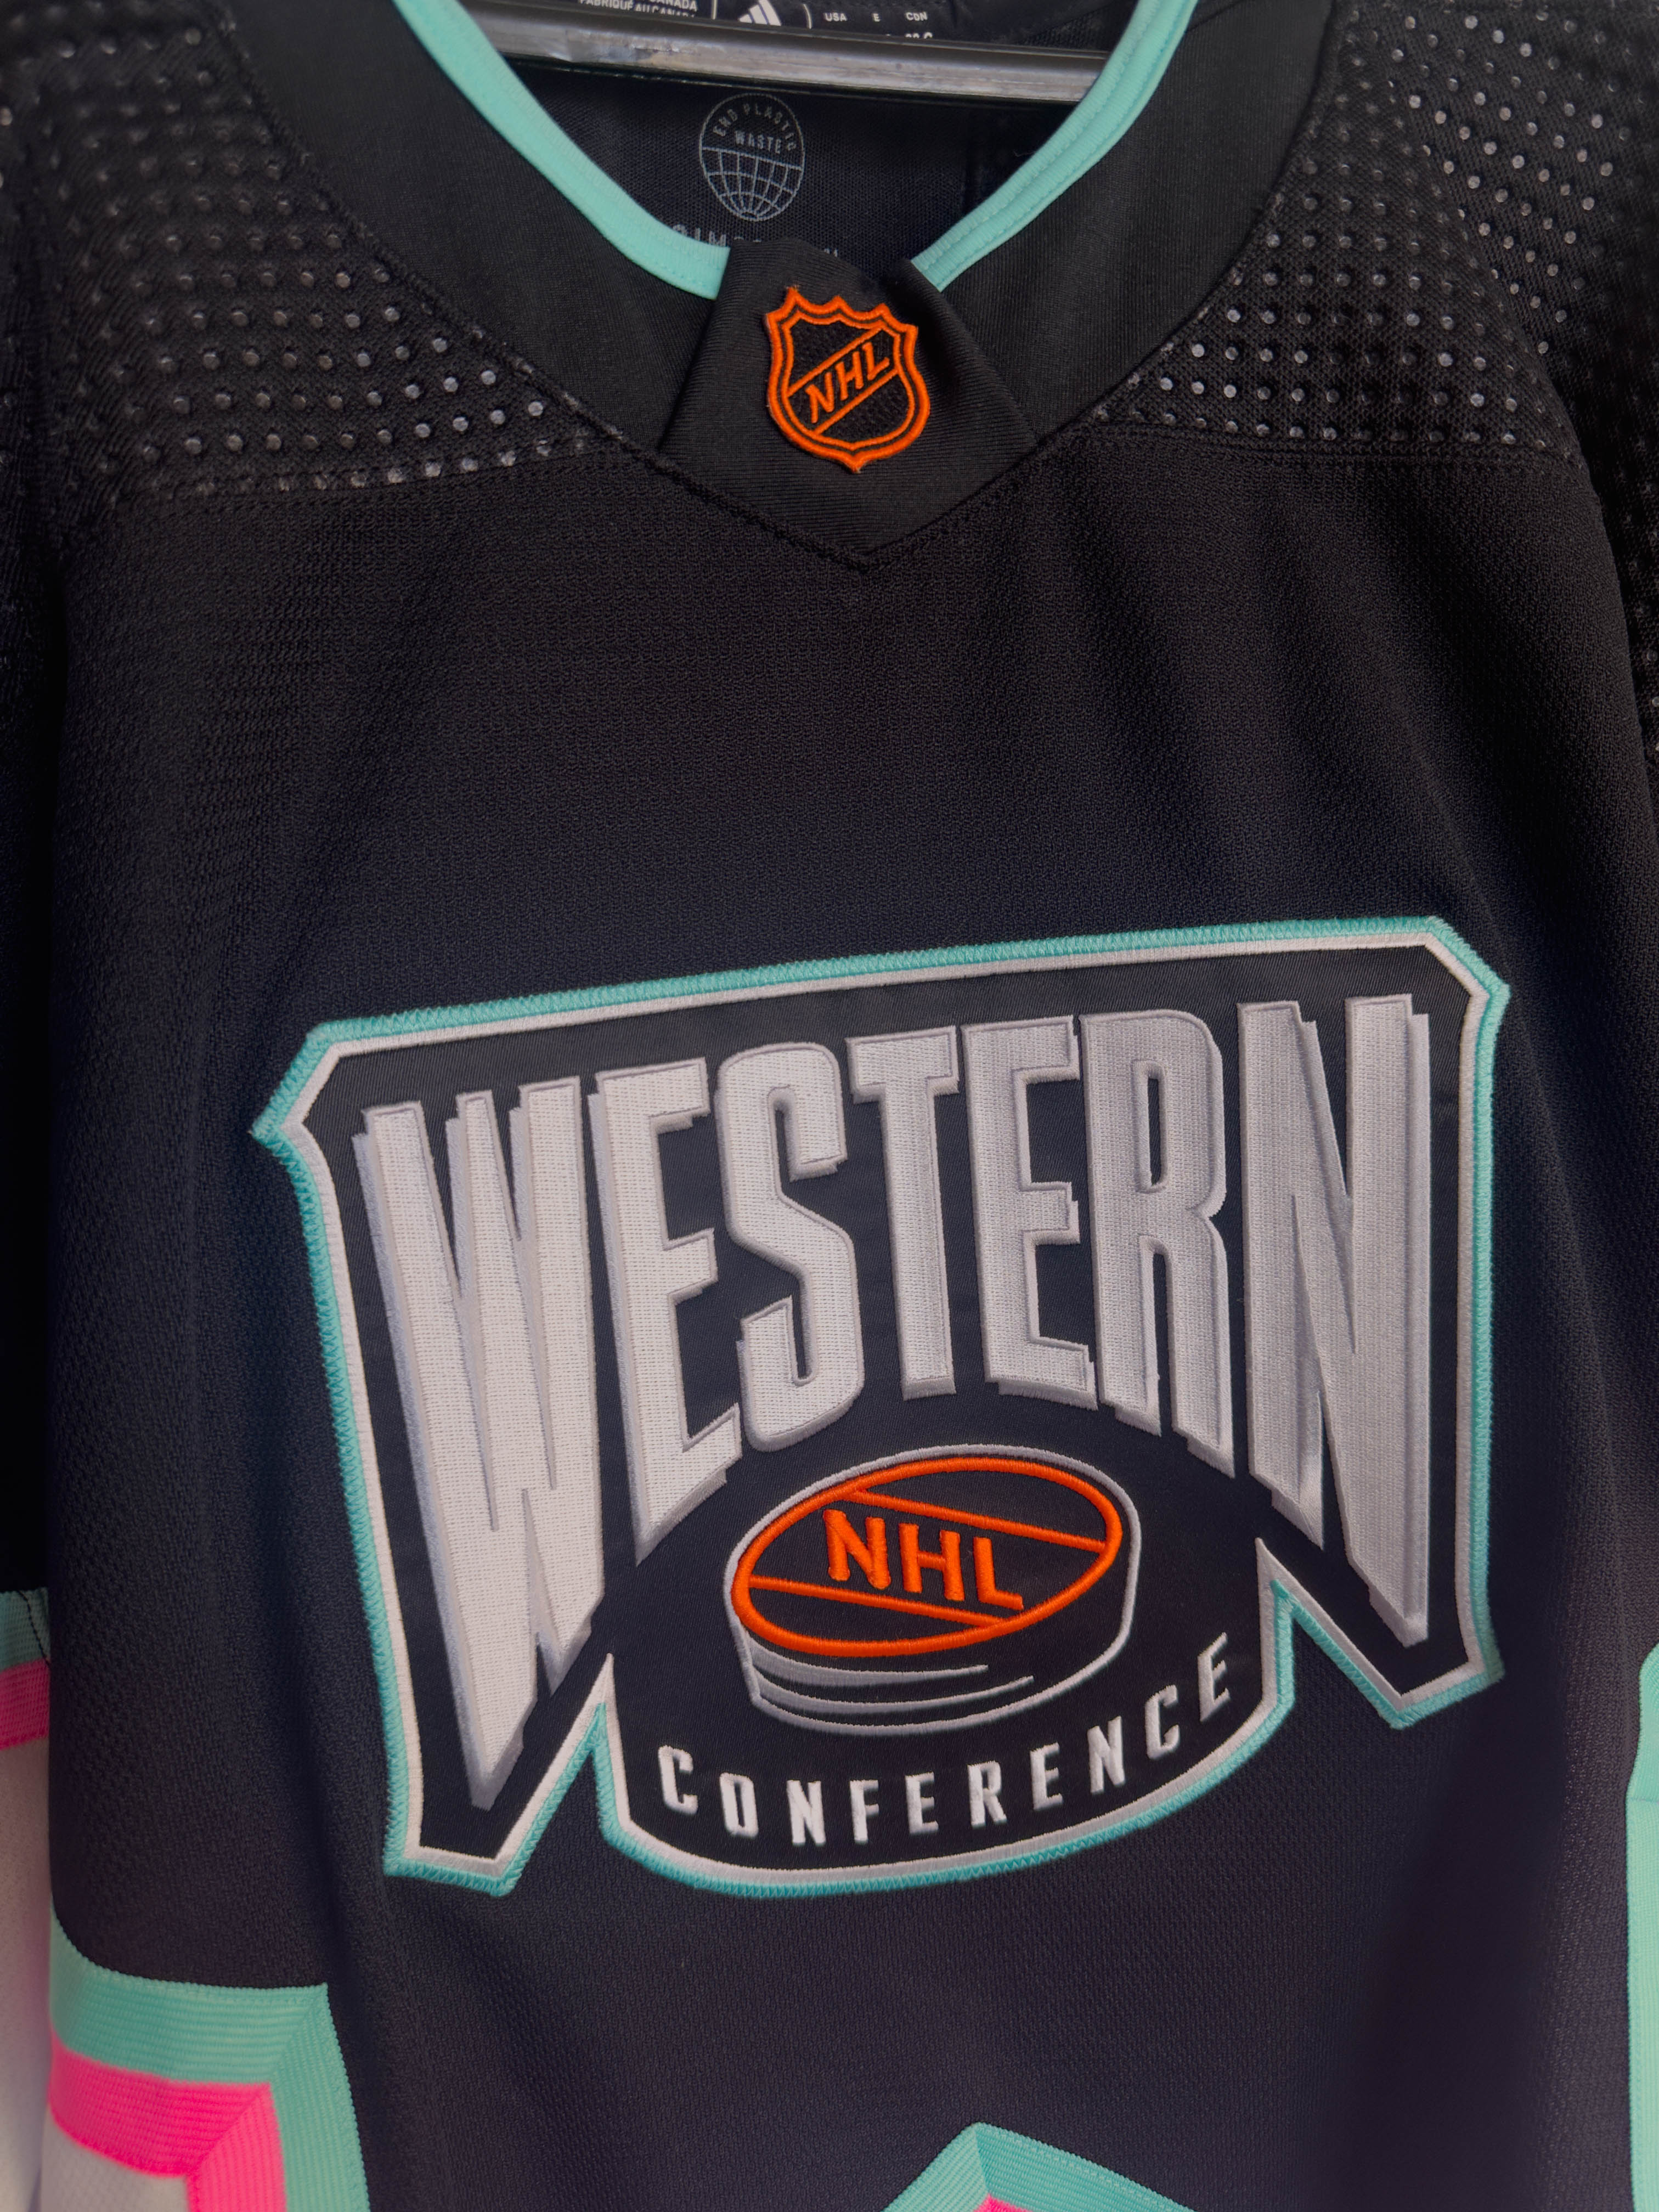 2023 NHL ALL STAR WESTERN CONFERENCE AUTHENTIC ADIDAS JERSEY BLACK - Size 60G (Goalie Cut Jersey)